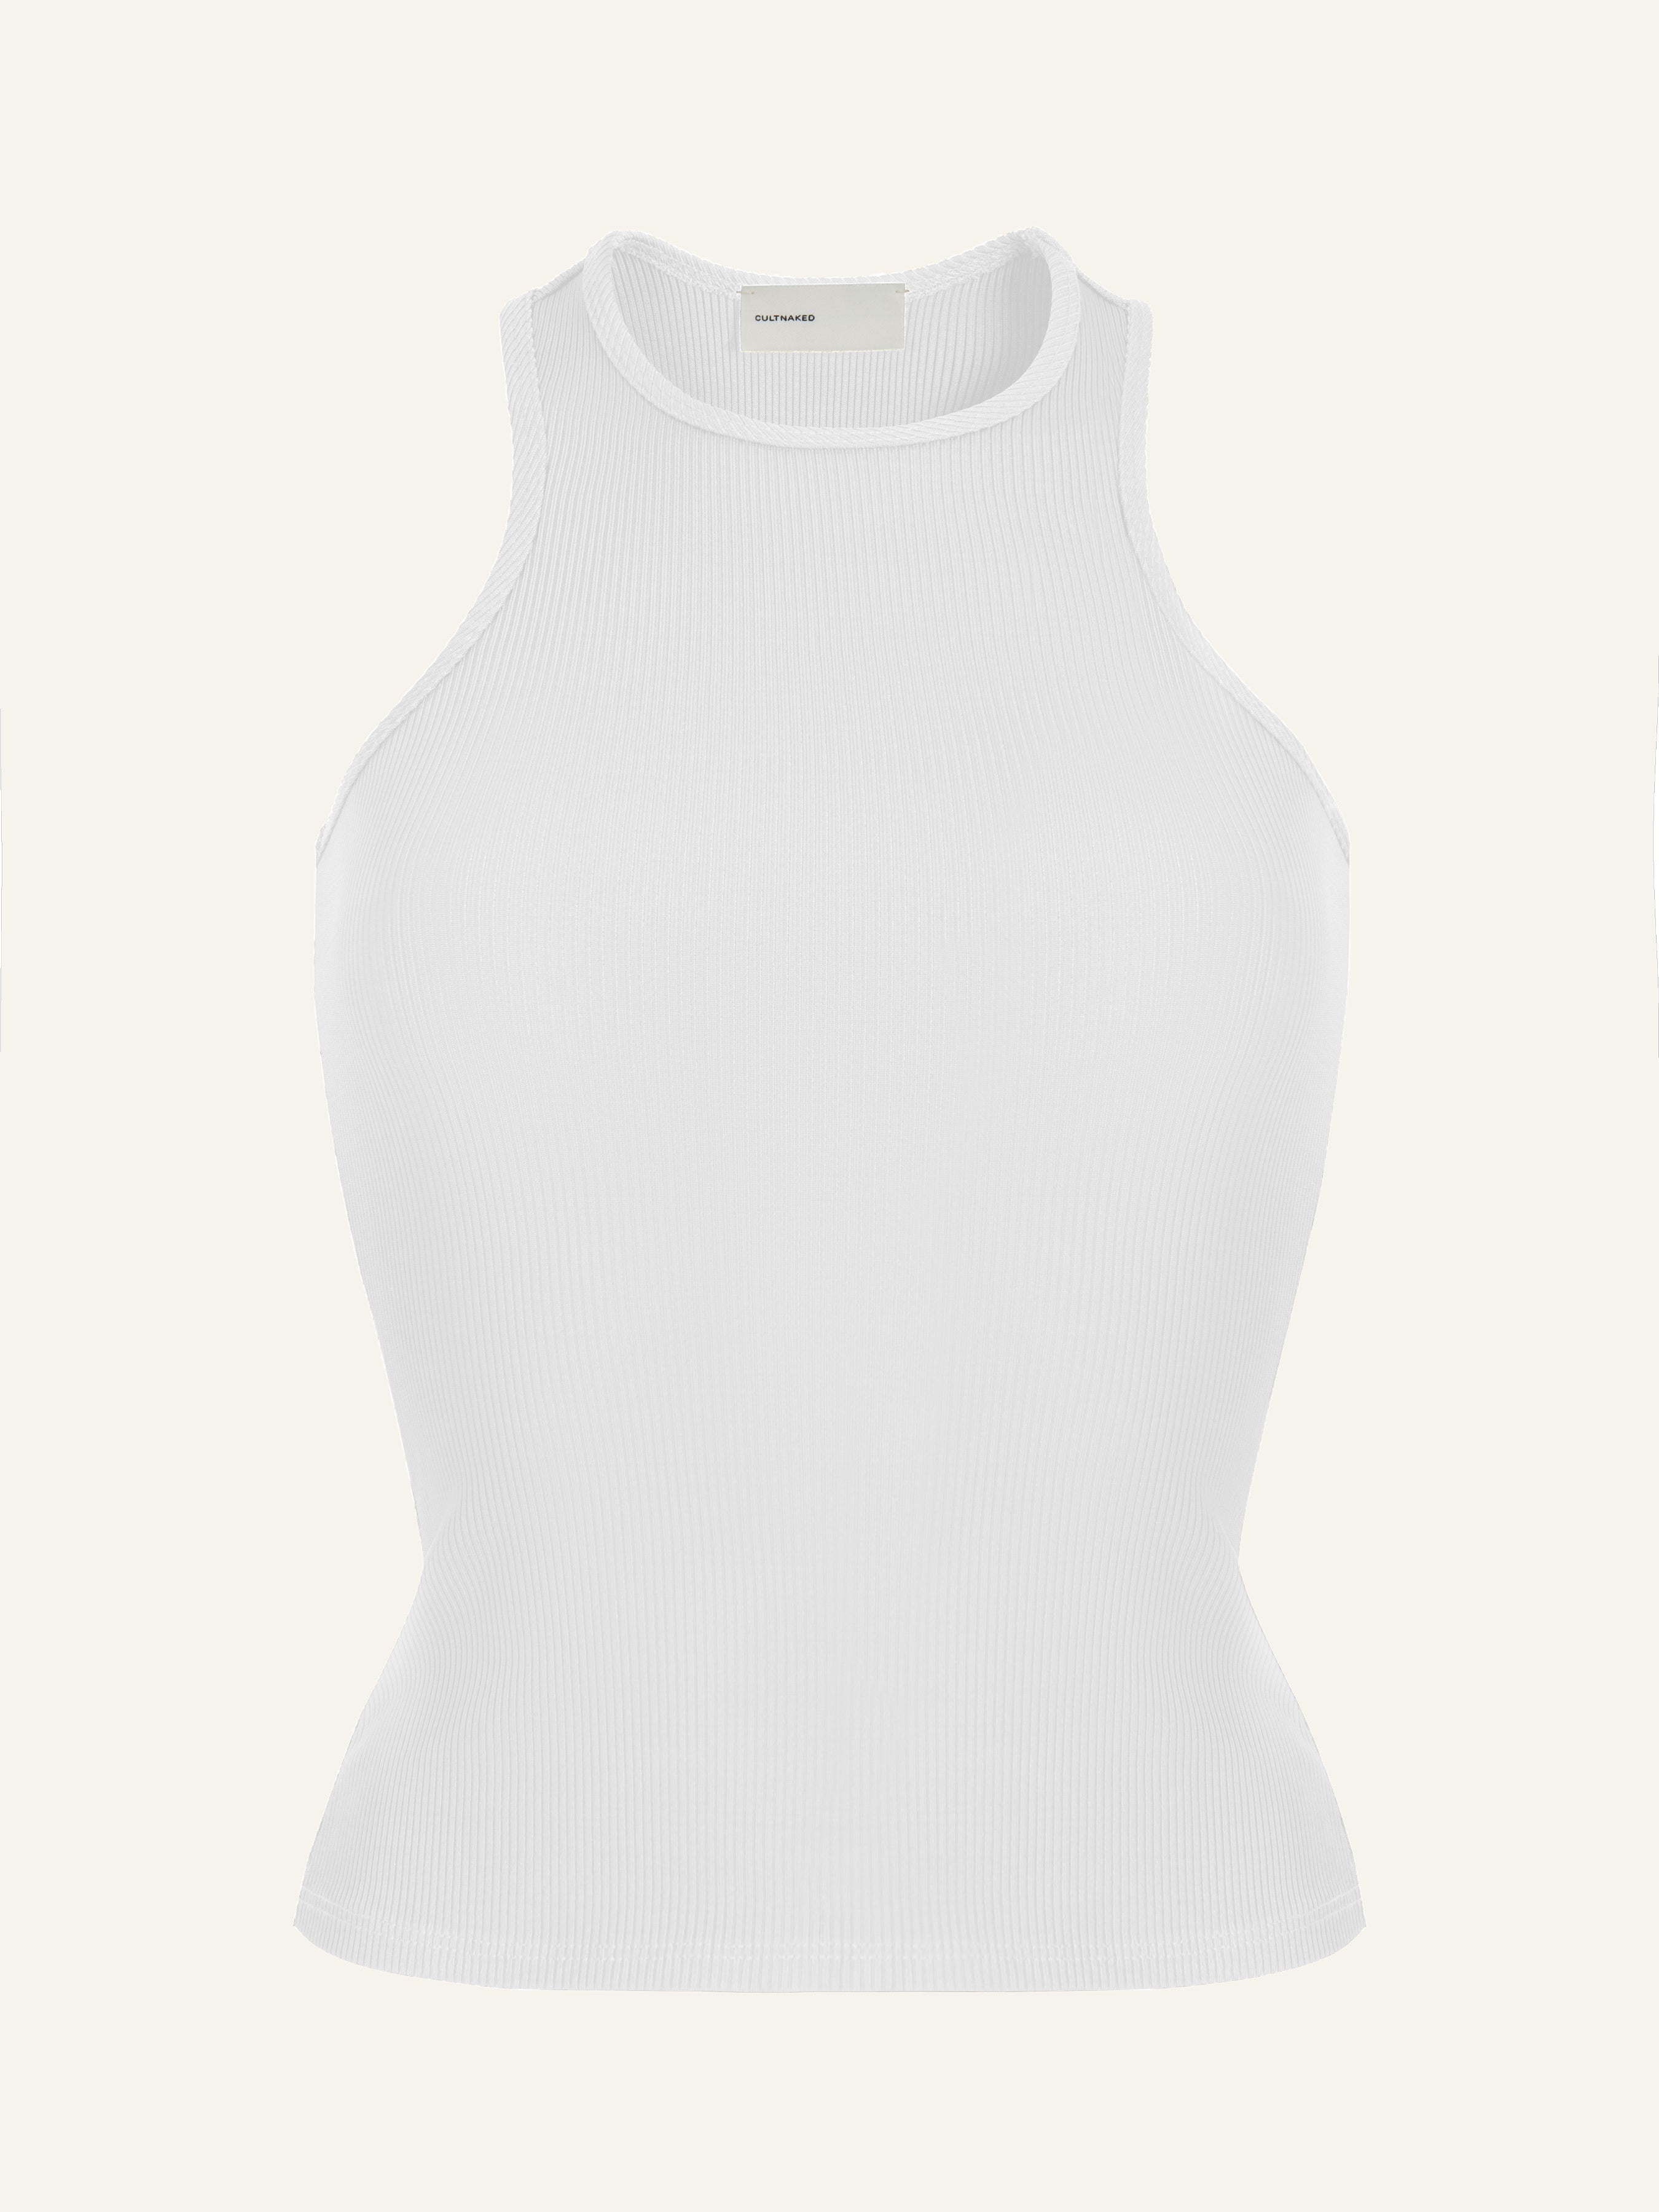 Product photography of white cotton tank top